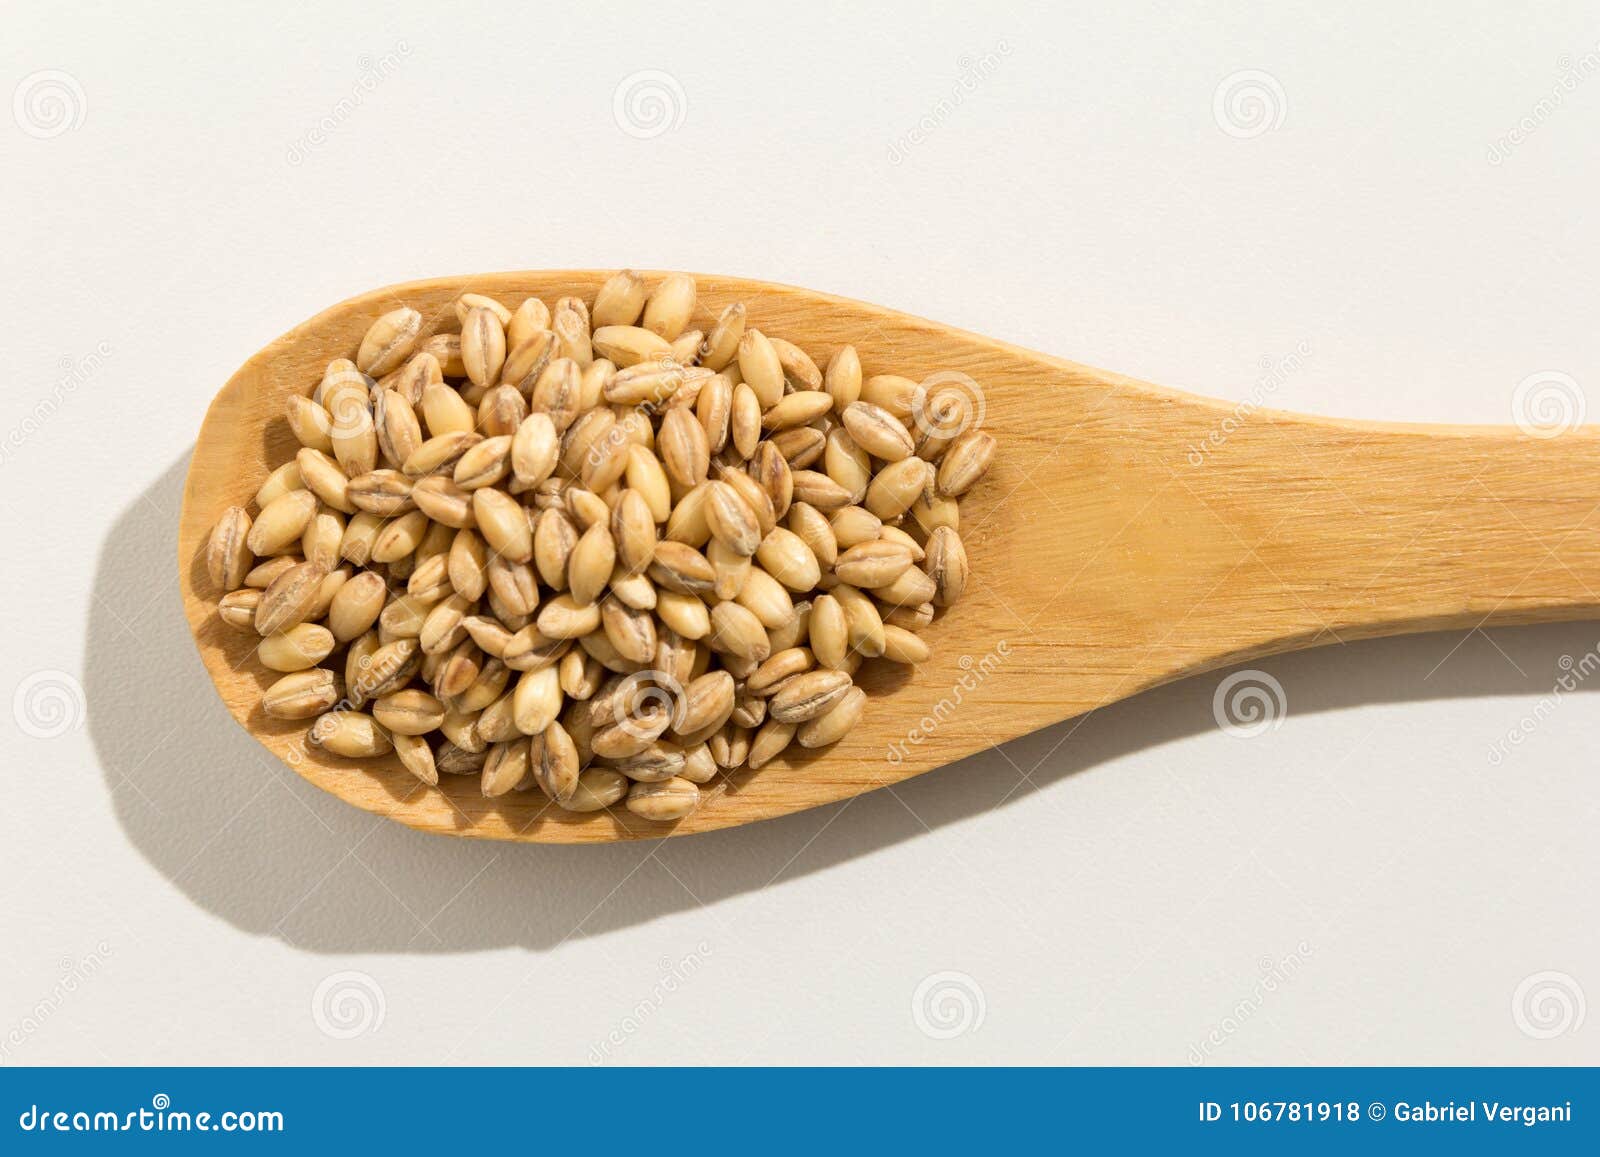 barley cereal grain. nutritious grains on a wooden spoon on whit